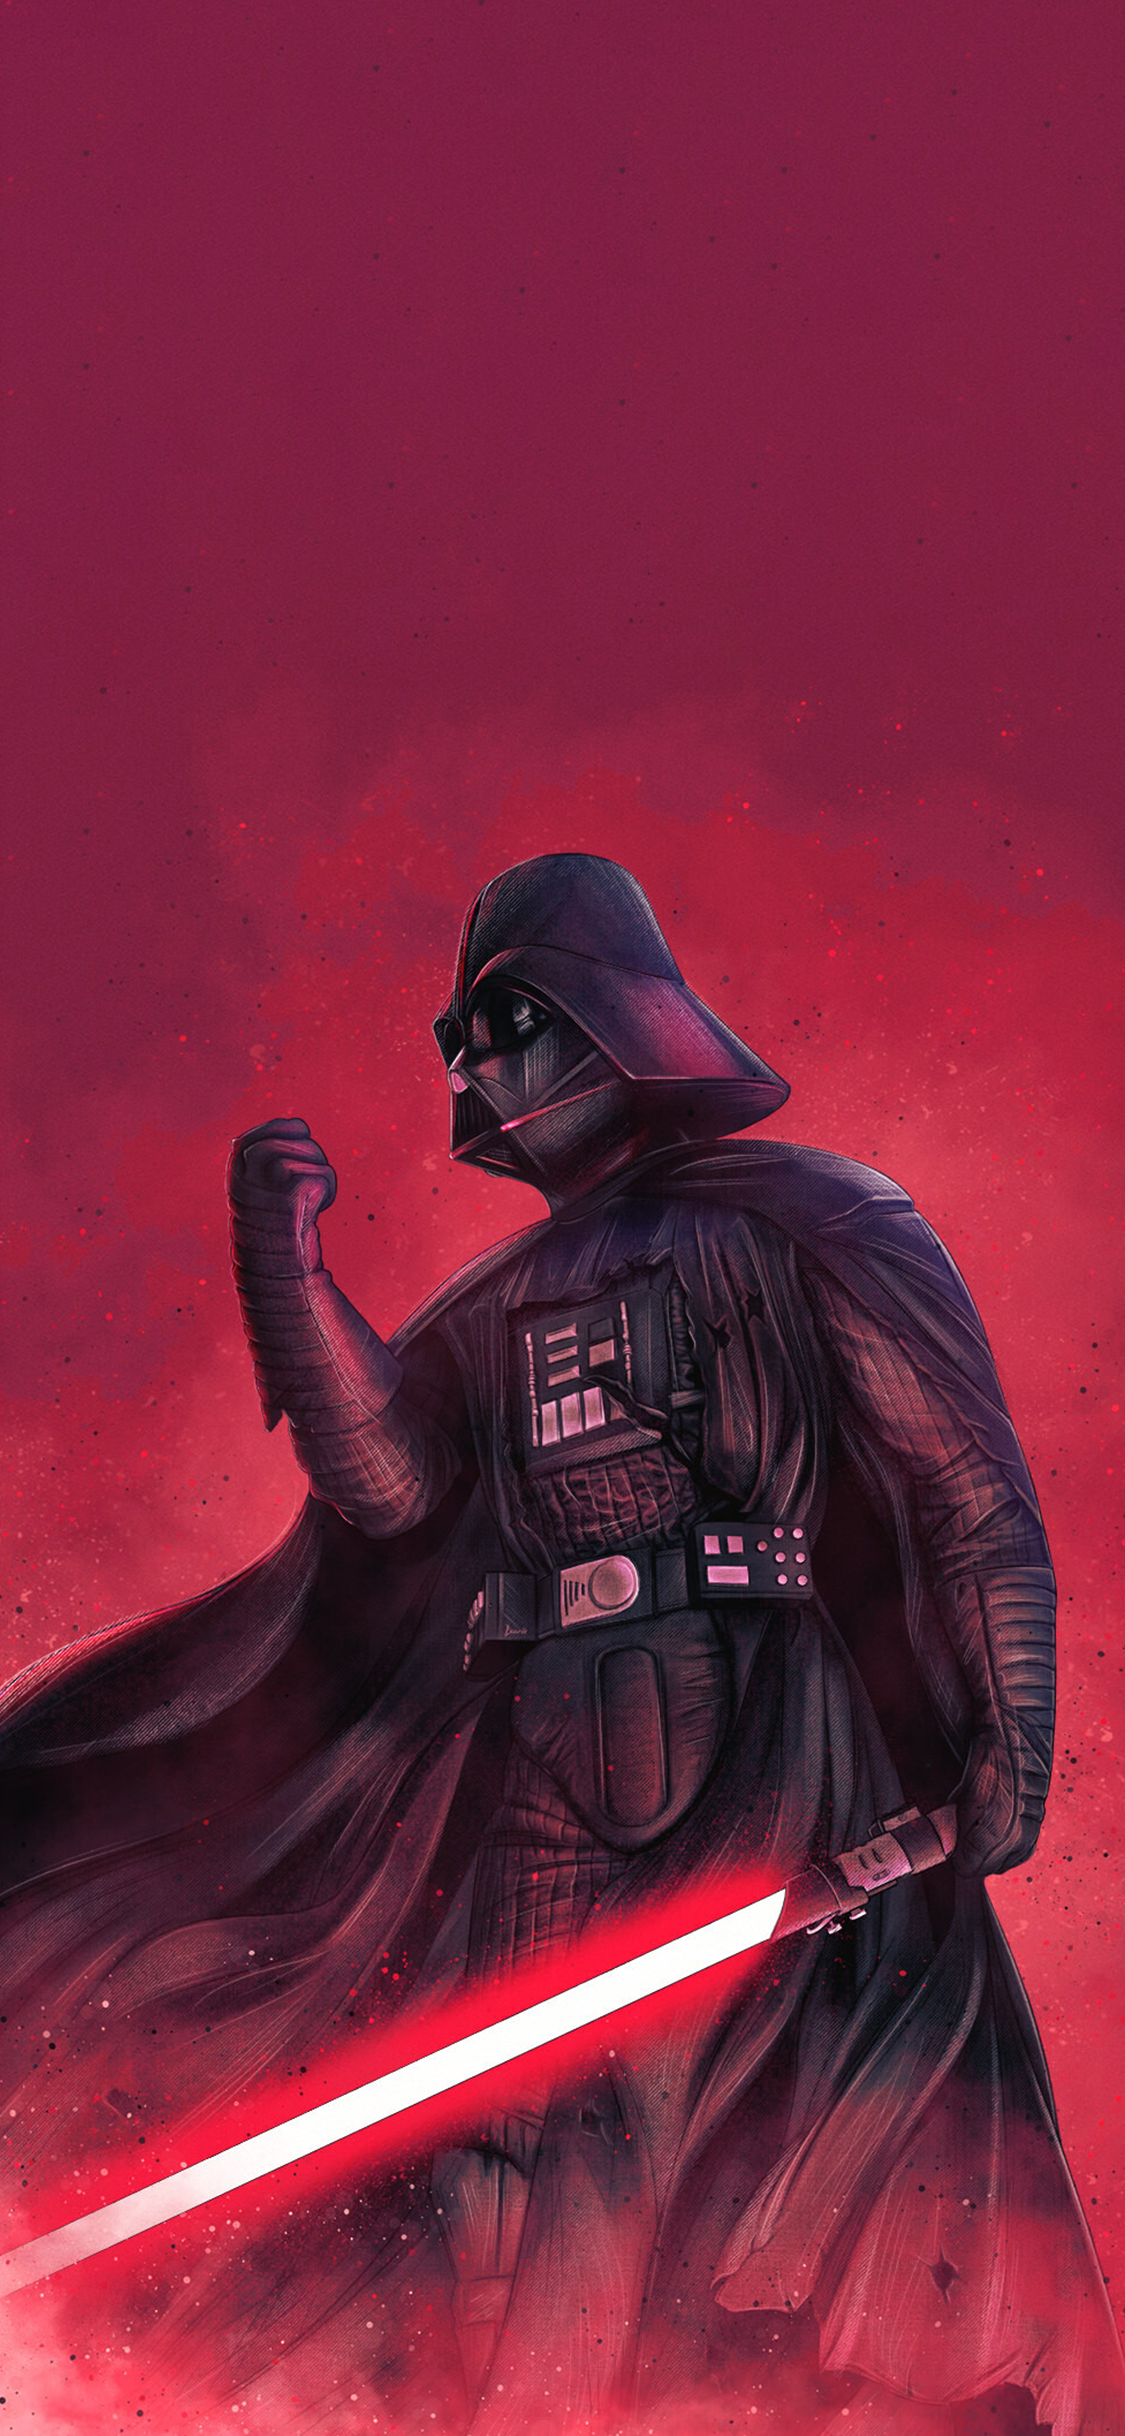 Download wallpaper 950x1534 darth vader with red lightbar dark iphone  950x1534 hd background 26616